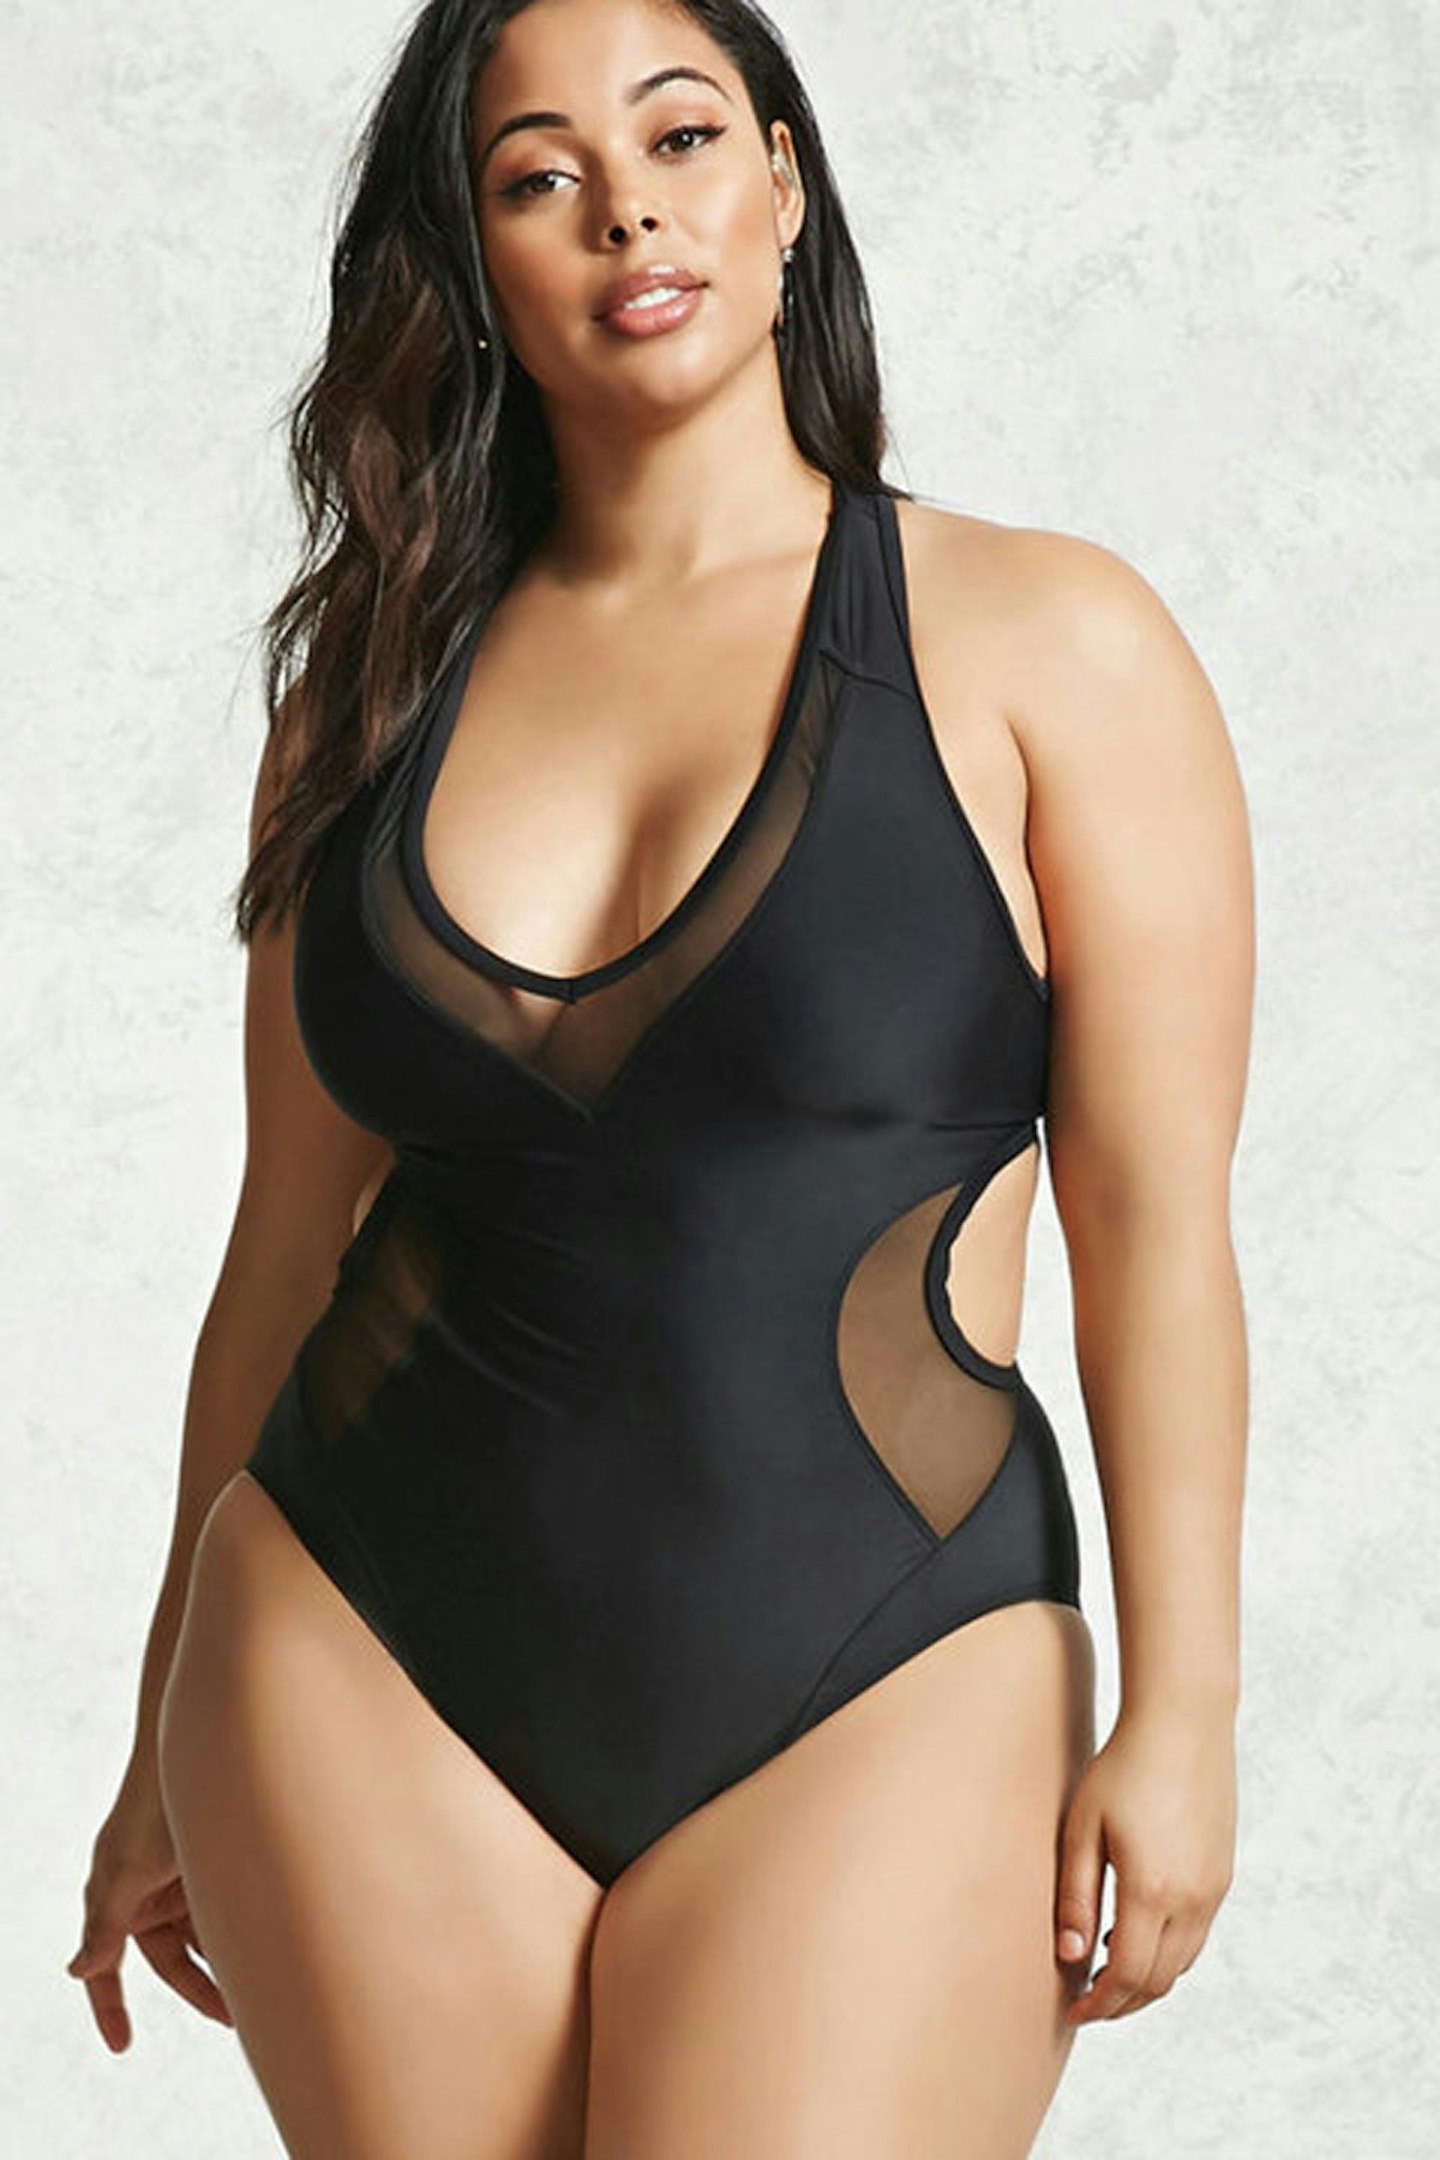 Forever 21 plus size swimwear collection